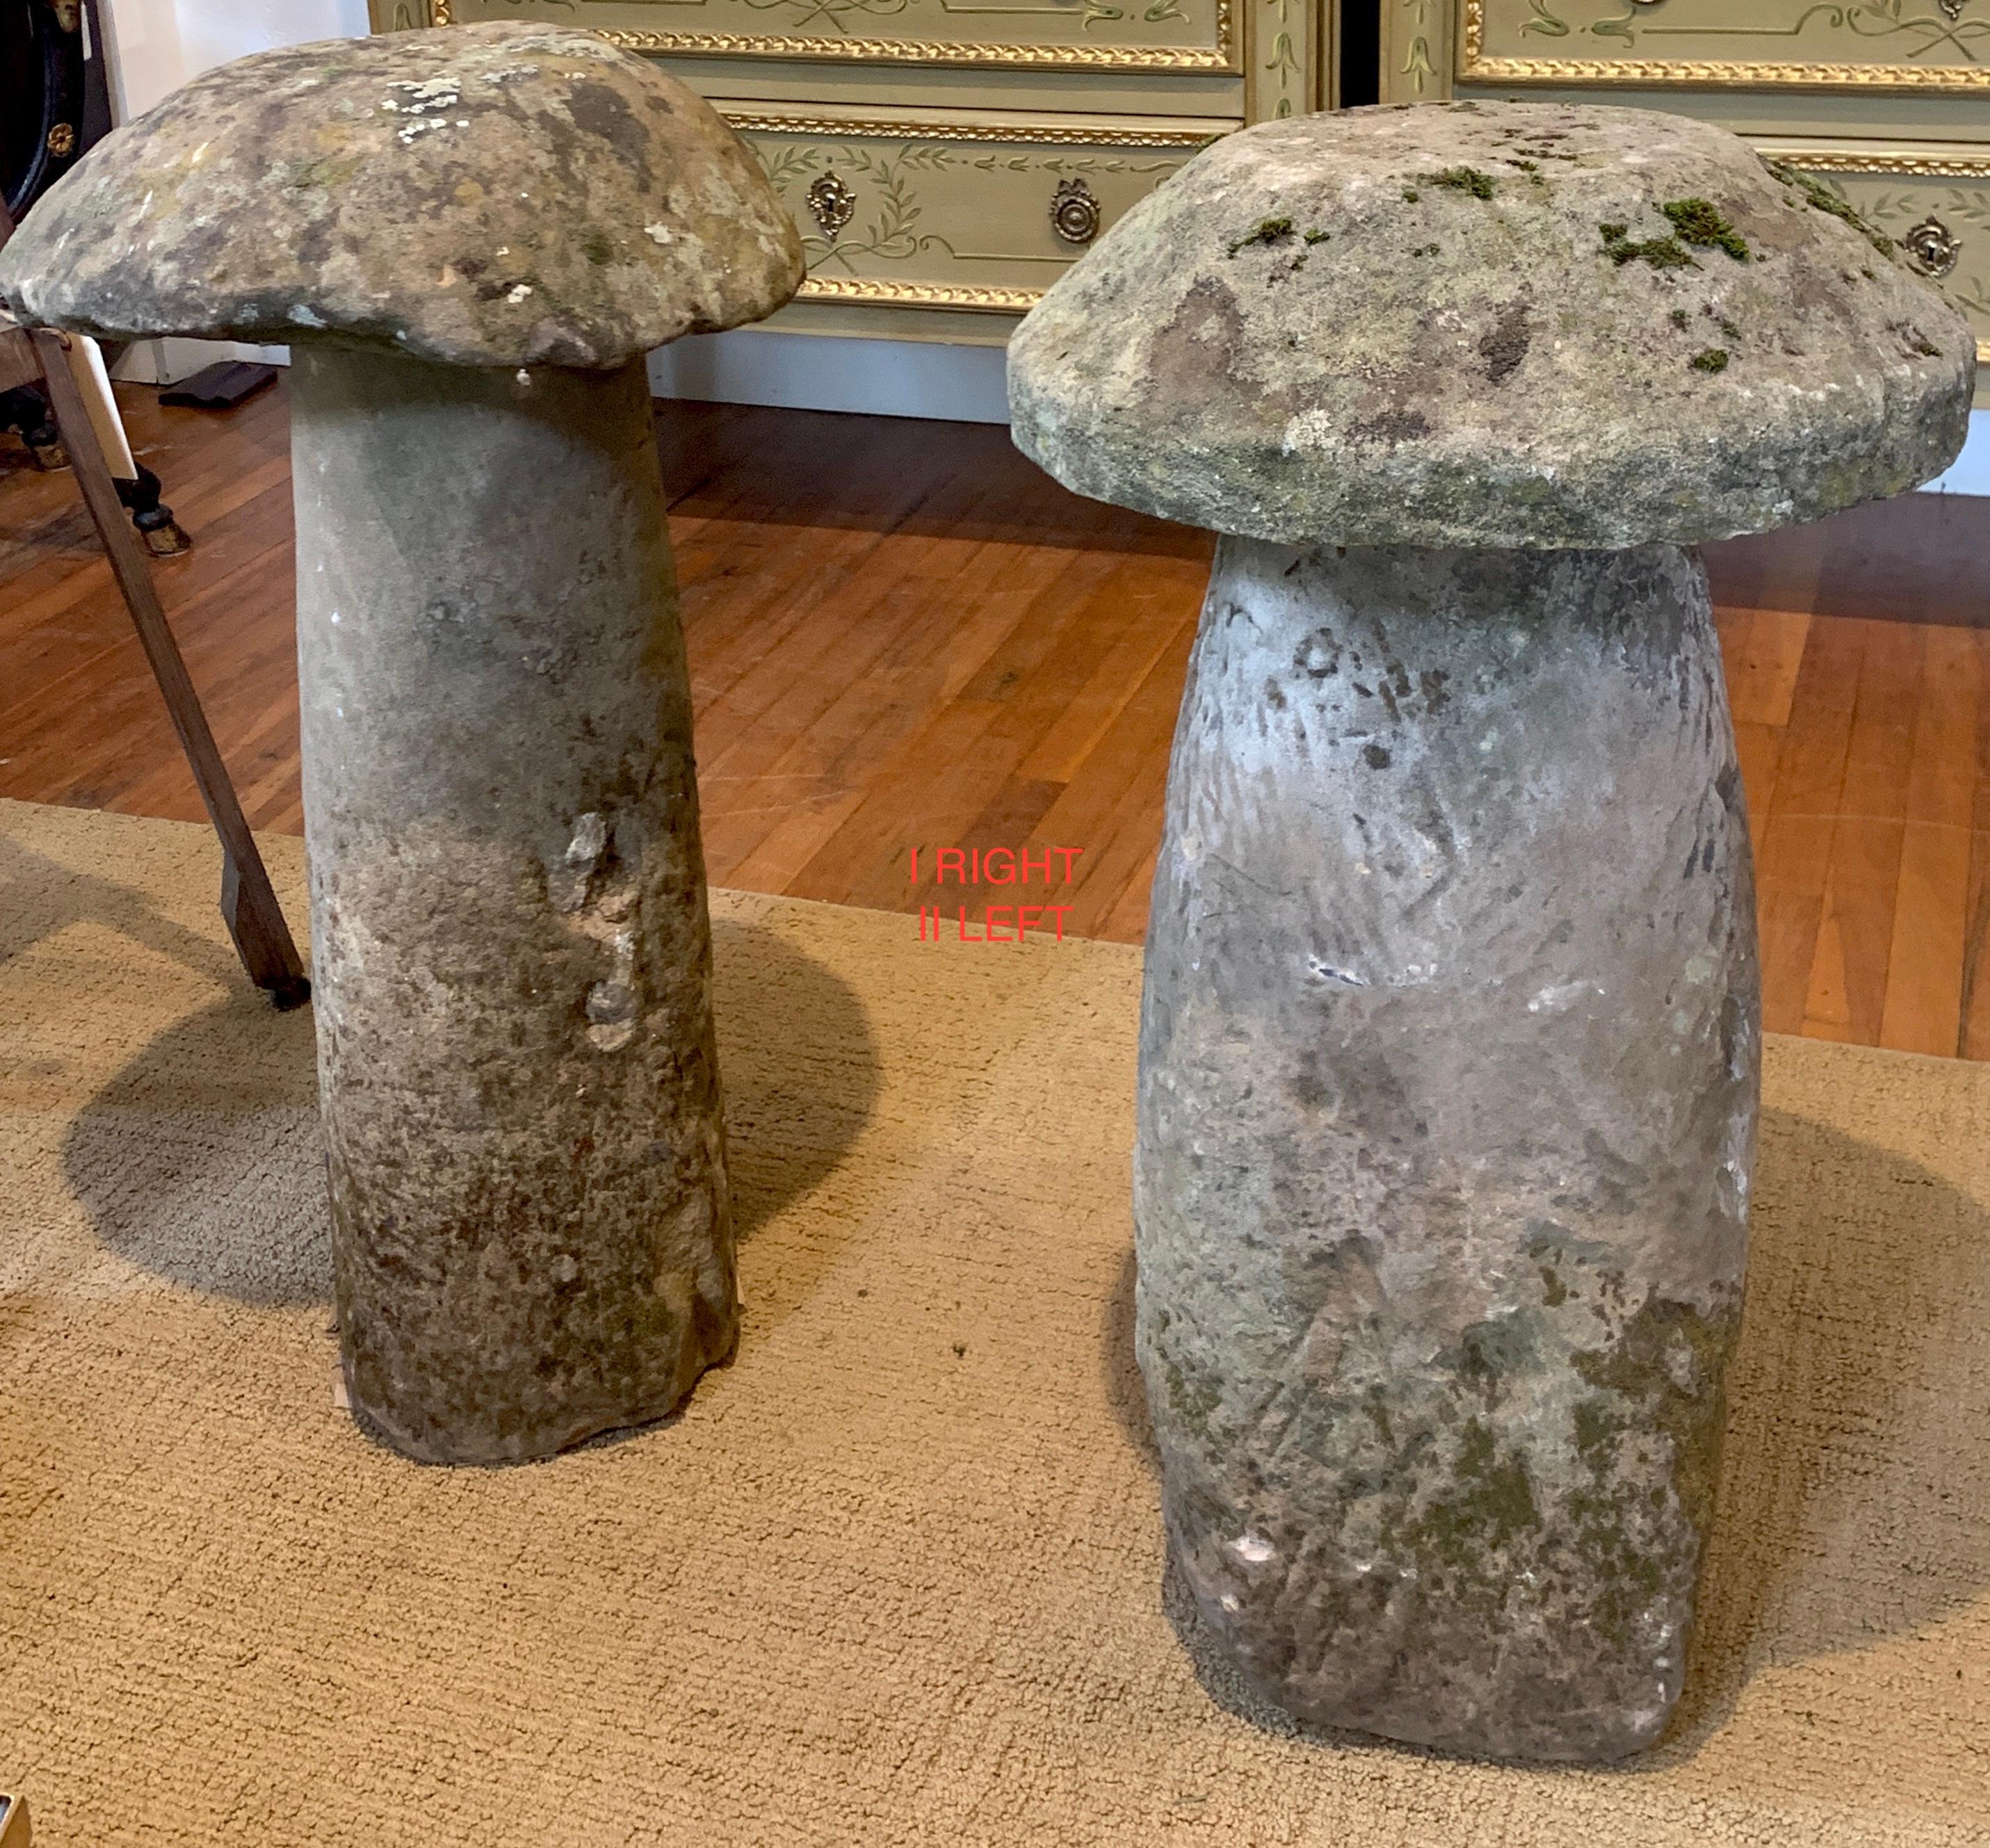 18th century English staddle stone, I & II available 
Gorgeous examples, each one in two parts, resembling 'Mushrooms' beautiful patina, size and shape.
Sold Individually, Please indicate at purchase which one I or II or both. 

Staddle stone I